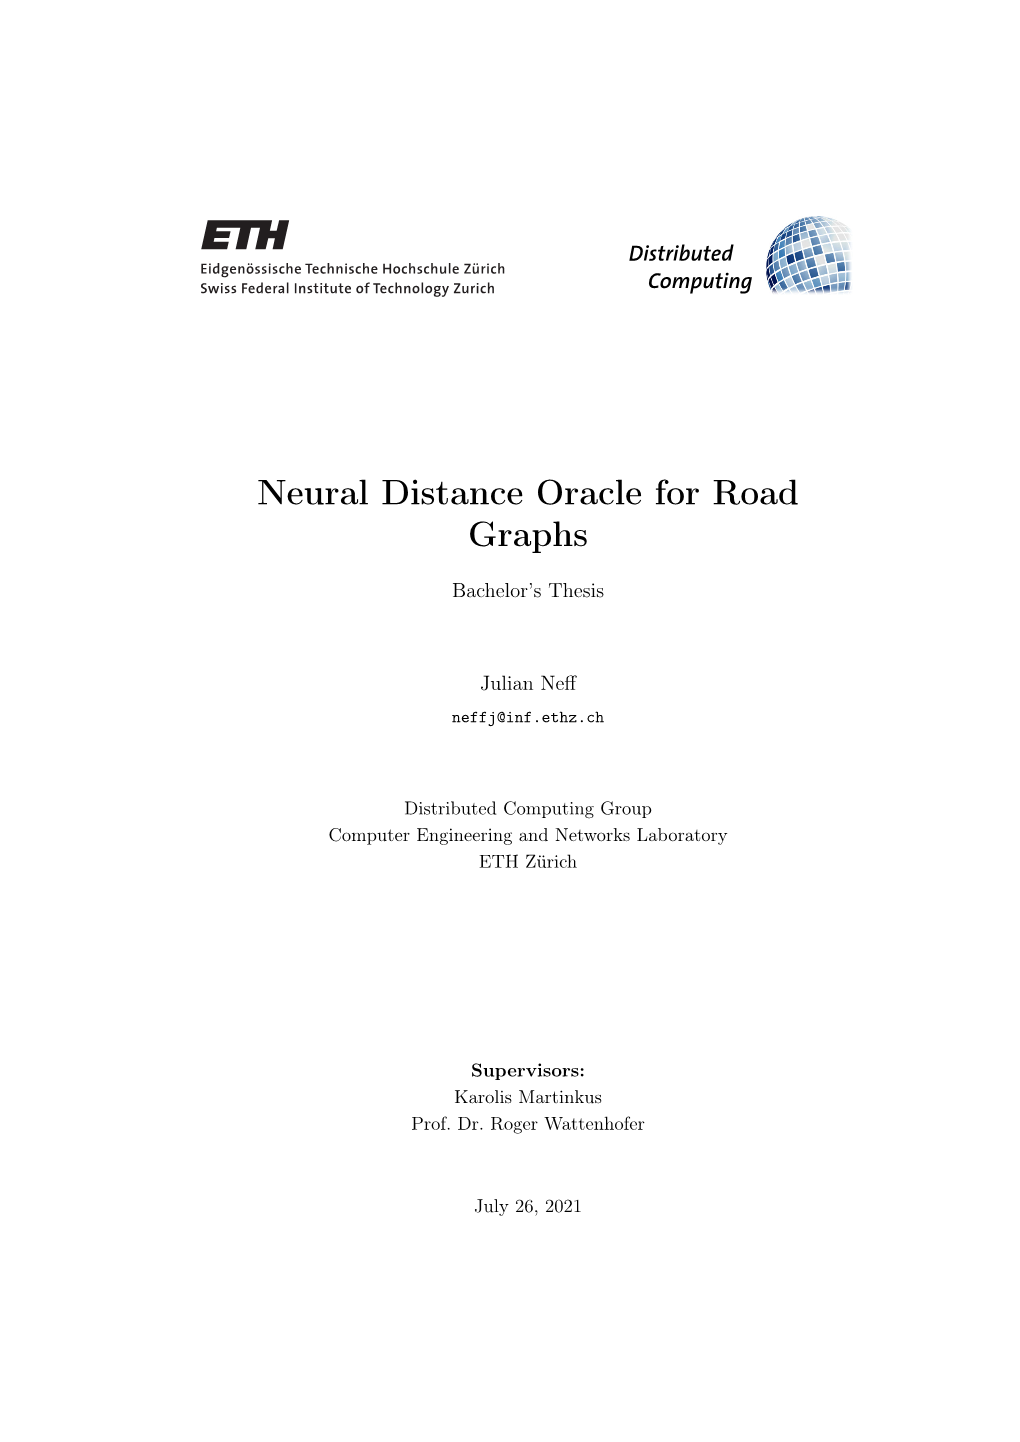 Neural Distance Oracle for Road Graphs